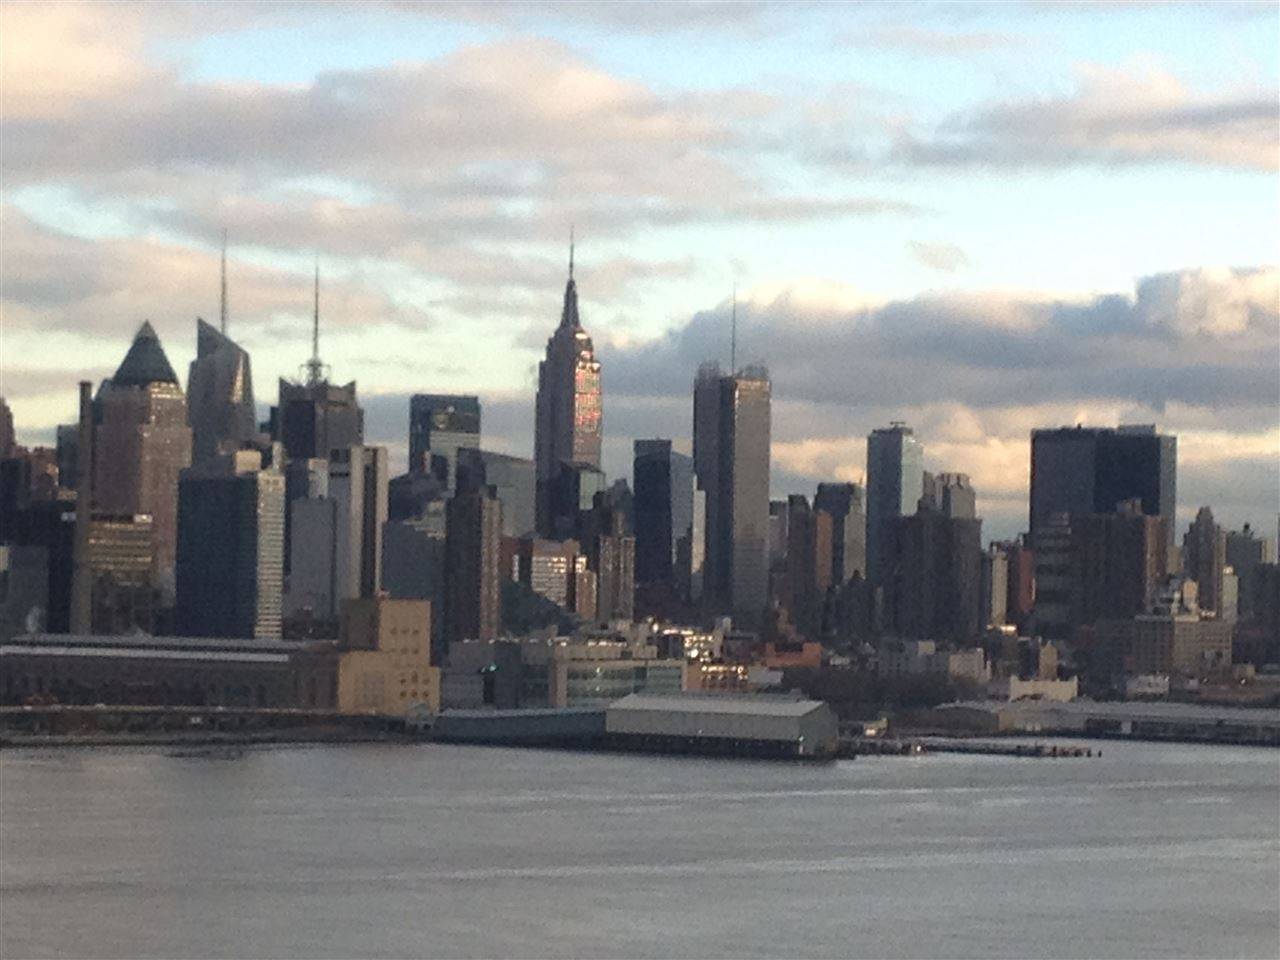 COMPLETELY UNOBSTRUCTED VIEW OF HUDSON RIVER FROM GW BRIDGE TO EMPIRE STATE BLDG